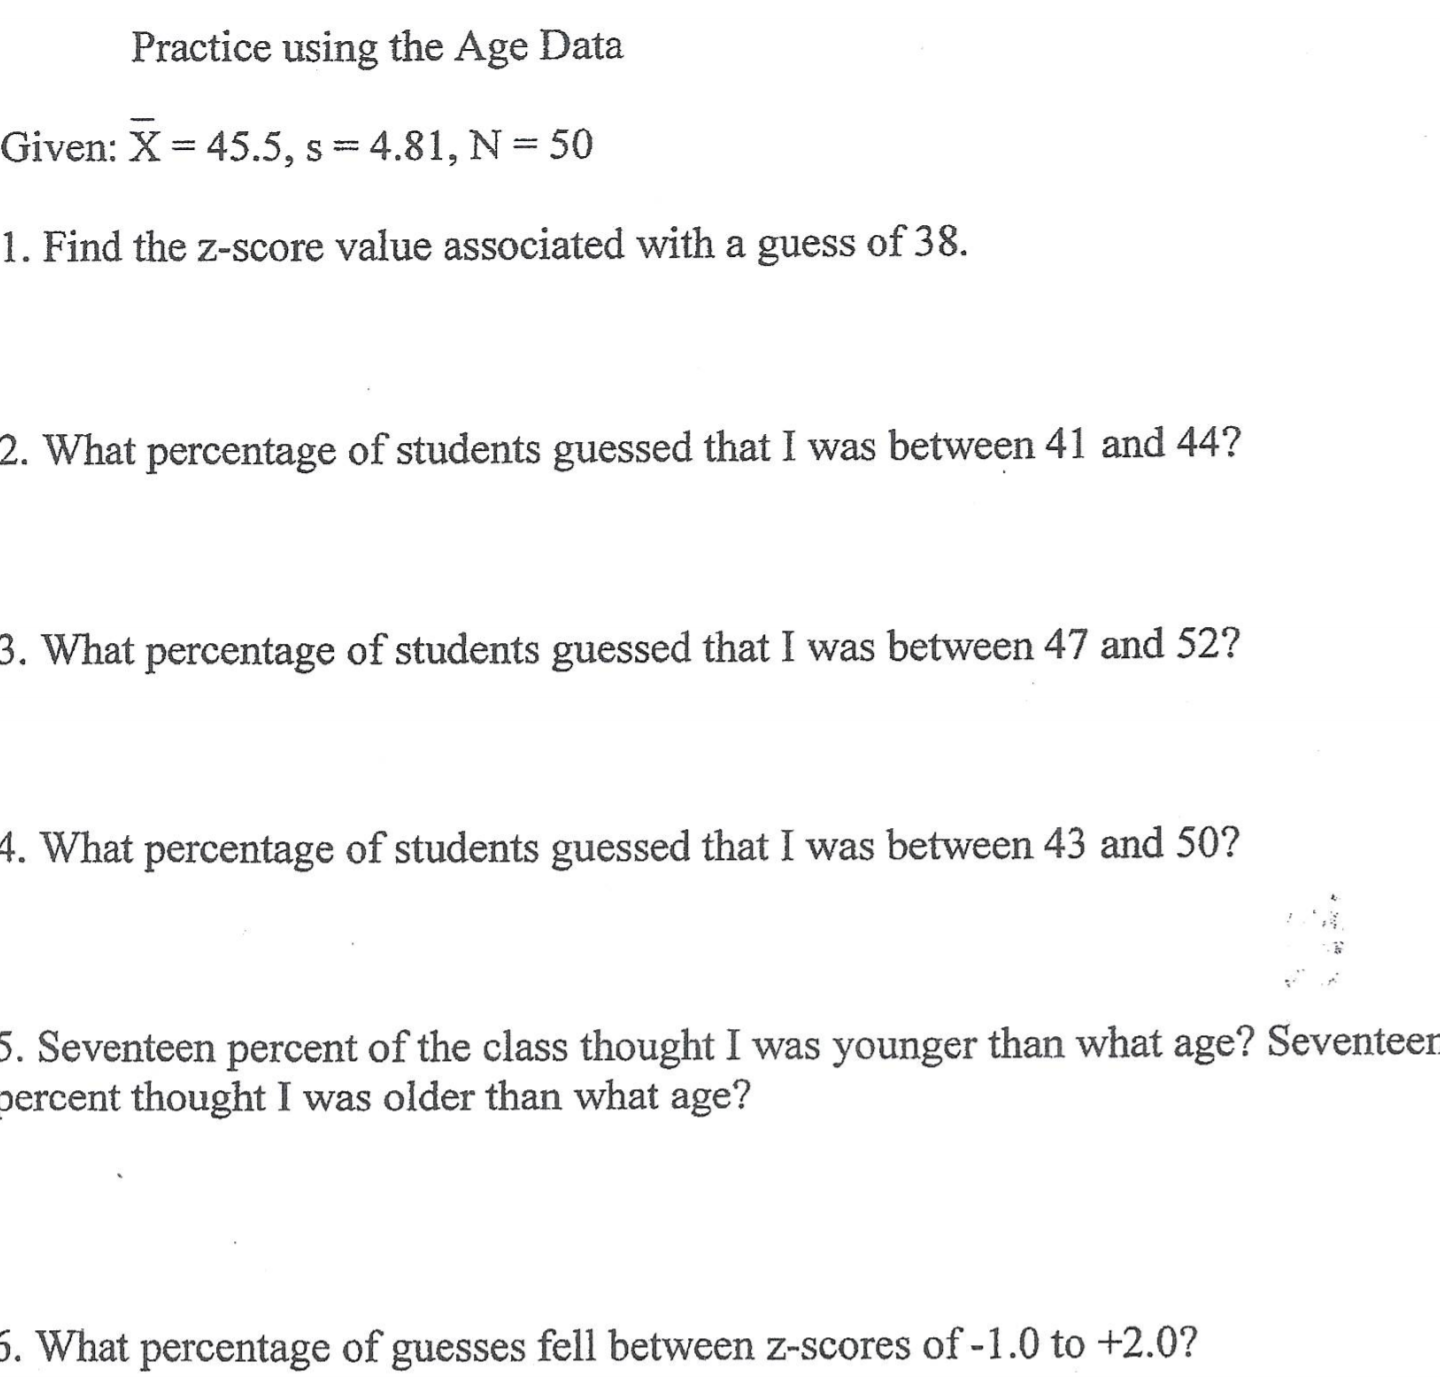 Given: X= 45.5, s=4.81, N = 50
1. Find the z-score value associated with a guess of 38.
2. What percentage of students guessed that I was between 41 and 44?
3. What percentage of students guessed that I was between 47 and 52?
